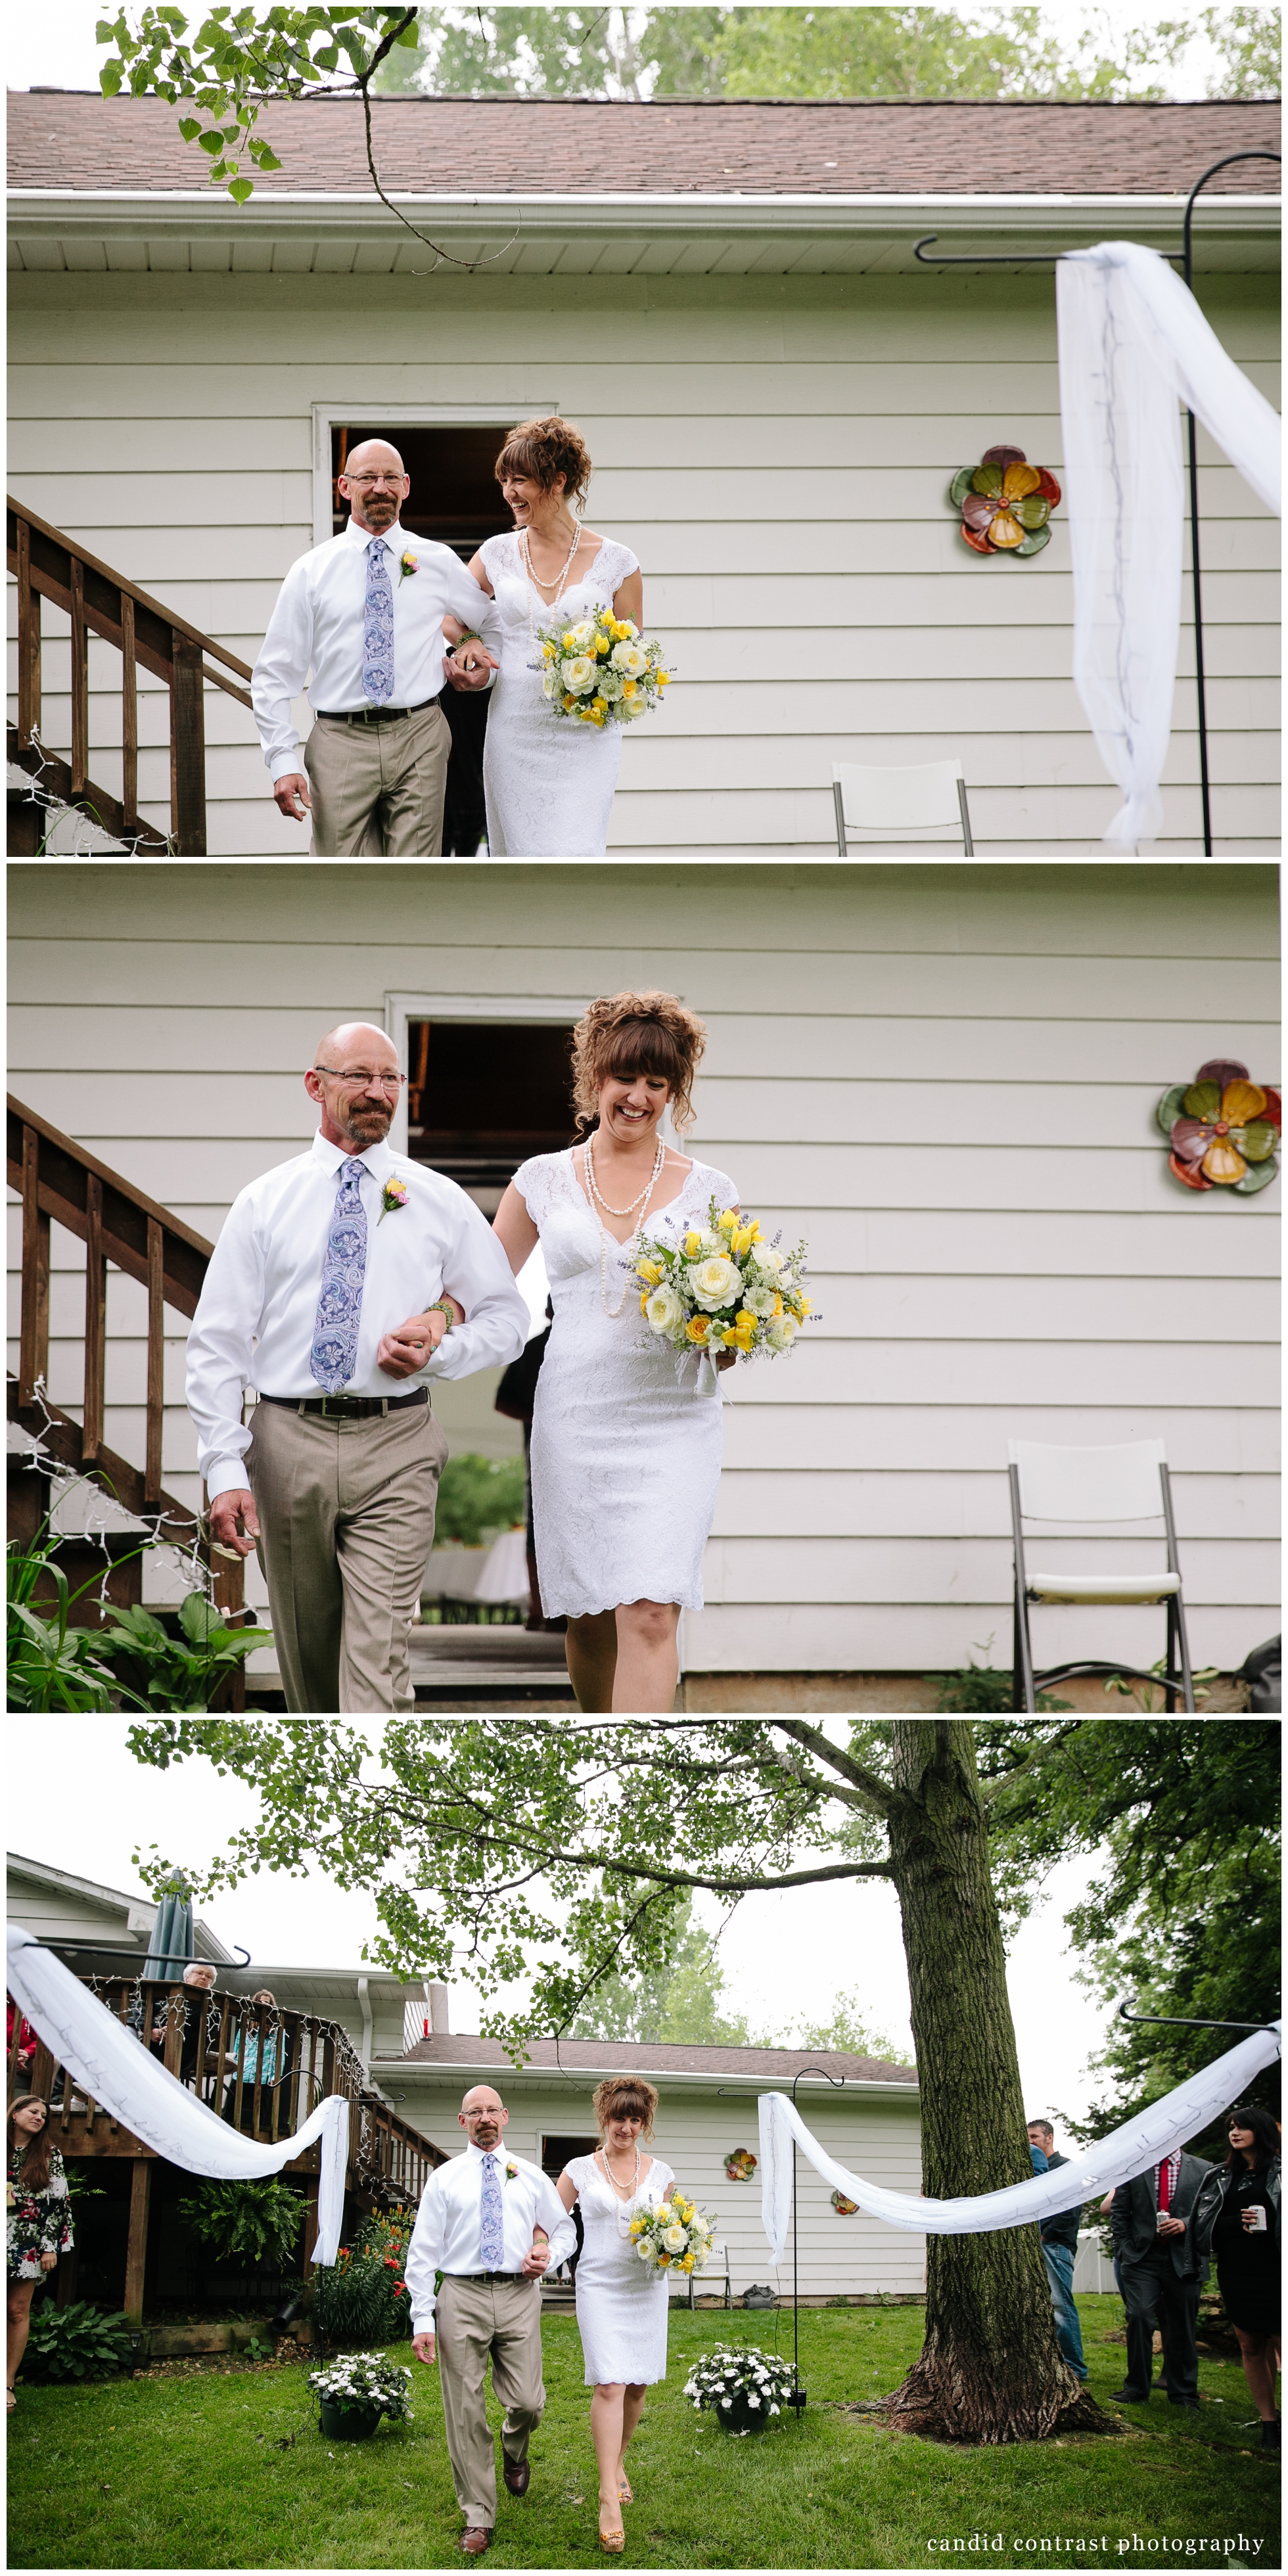 dad walking bride down the aisle at backyard wedding in dubuque, ia, candid contrast photography